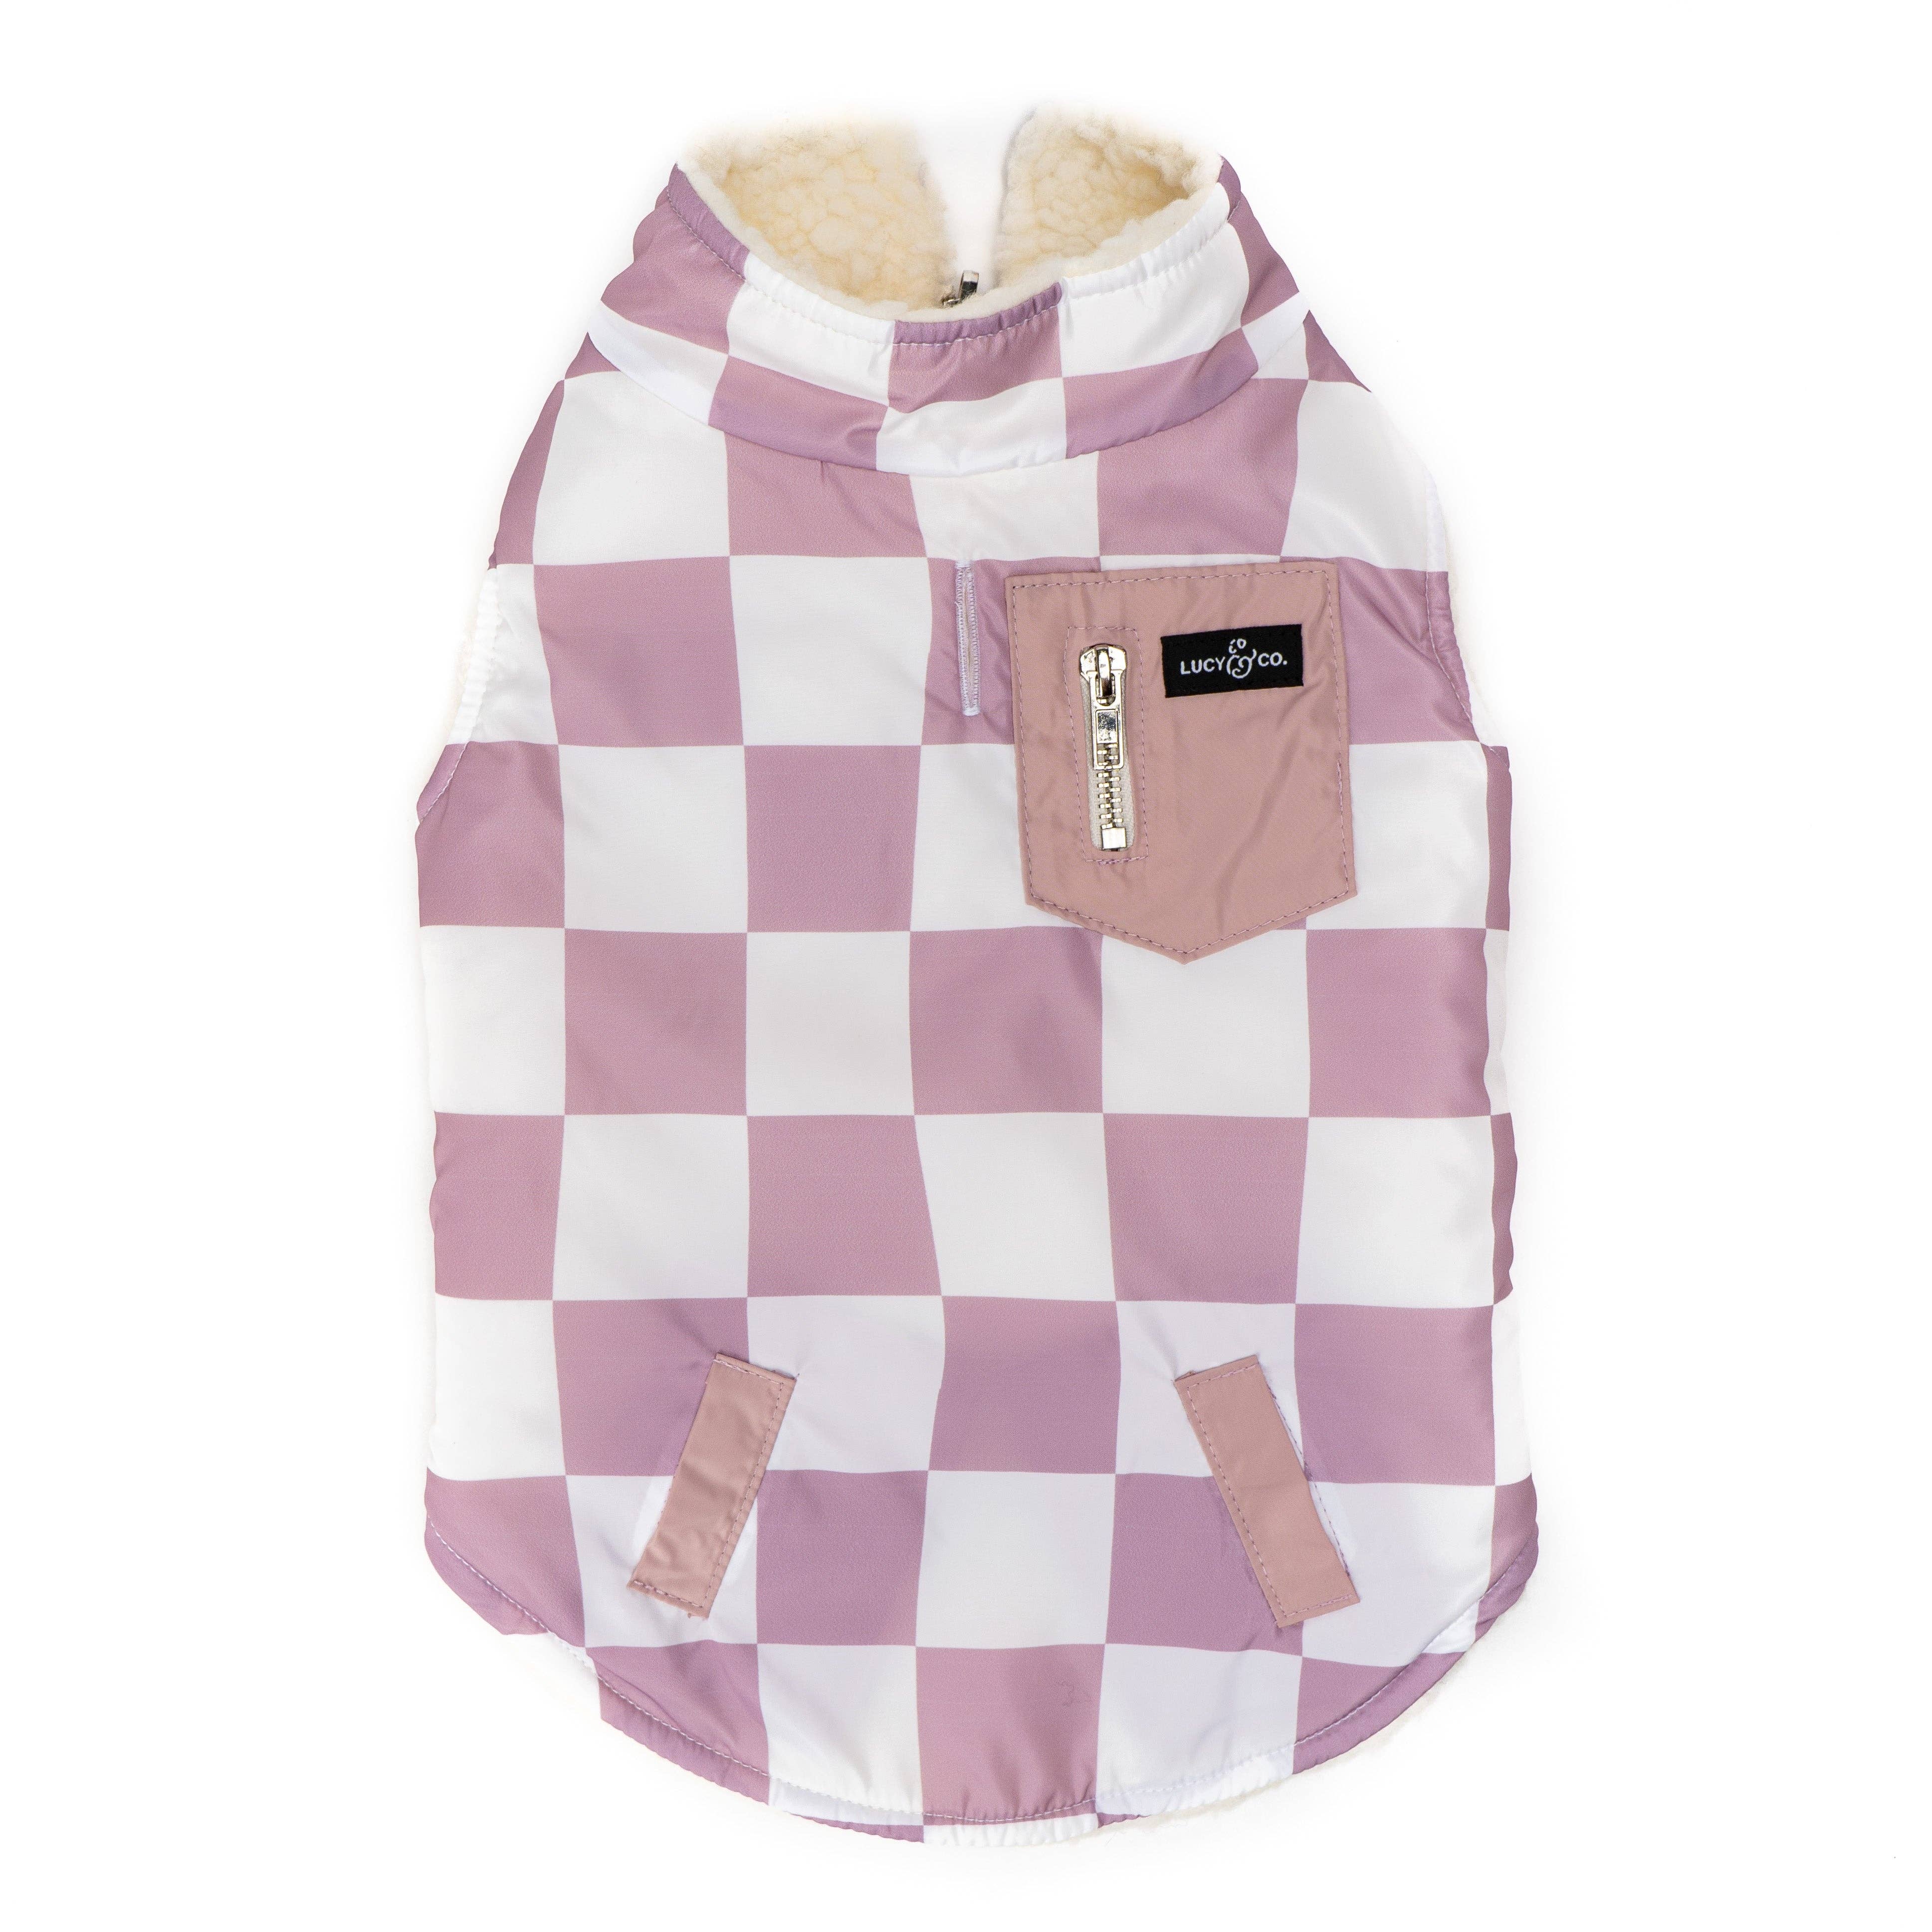 The Checked Out Reversible Teddy Vest: 2XL